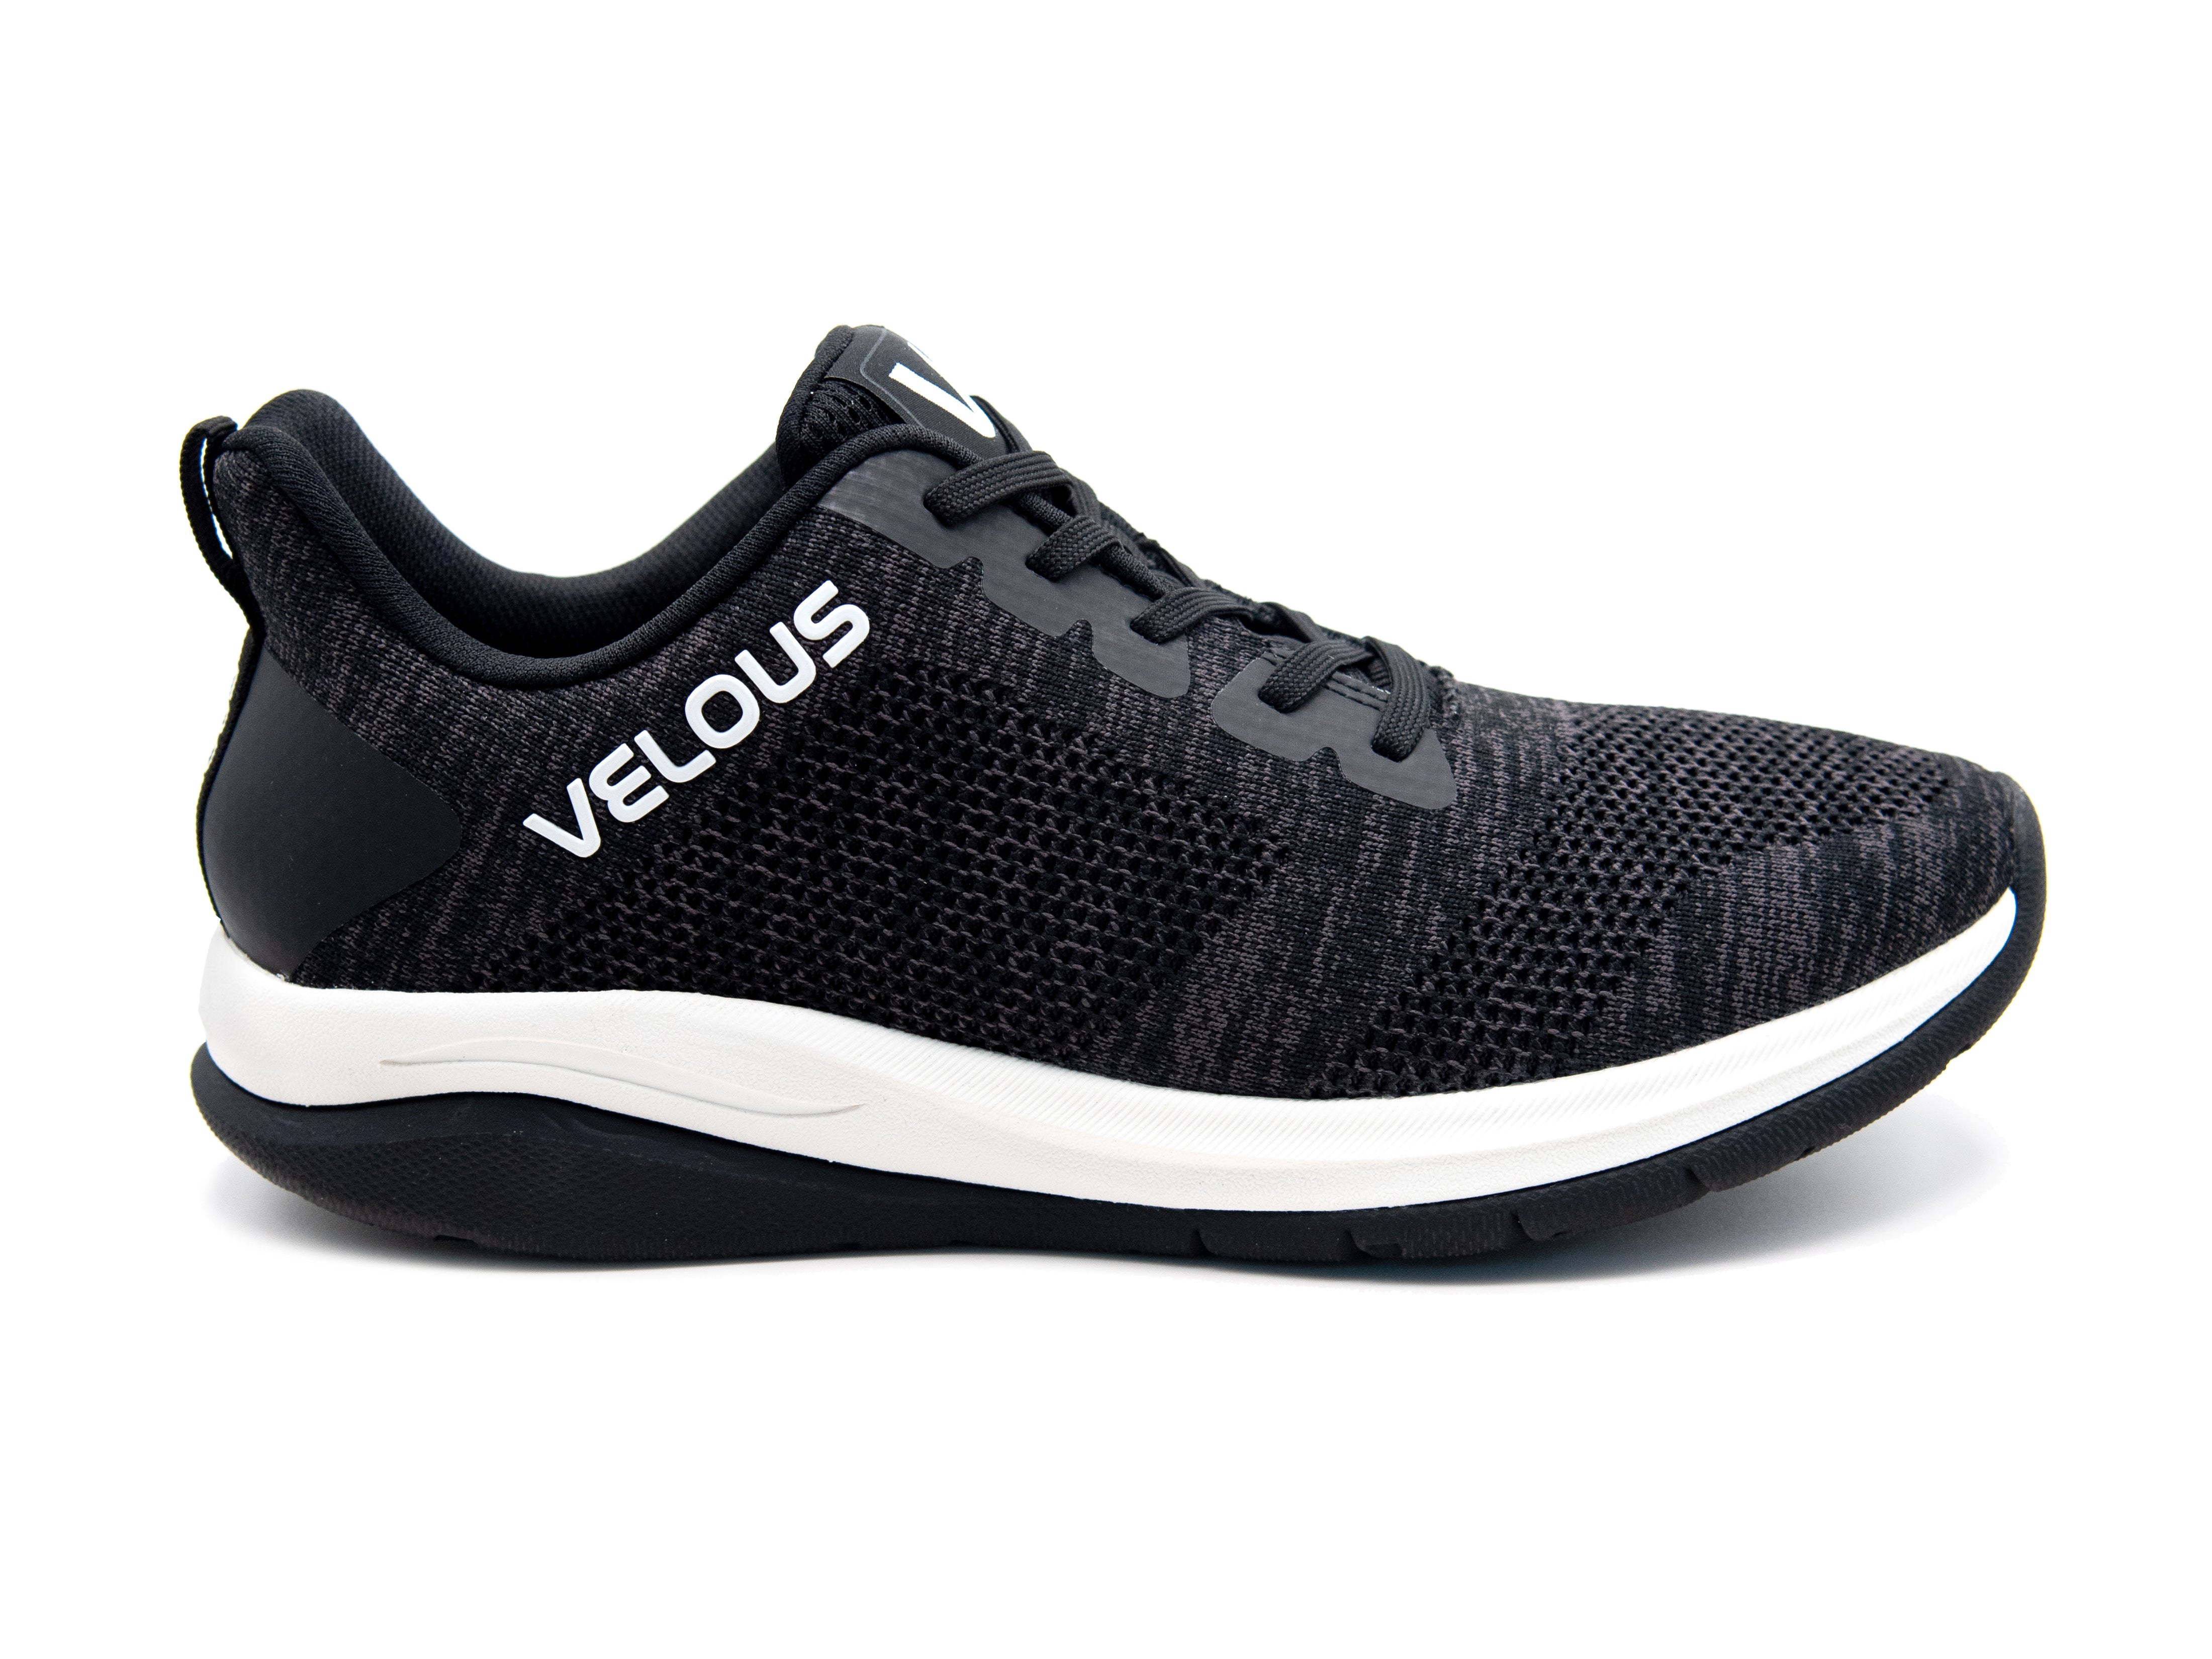 VELOUS Skyline Lace-Up Chaussure